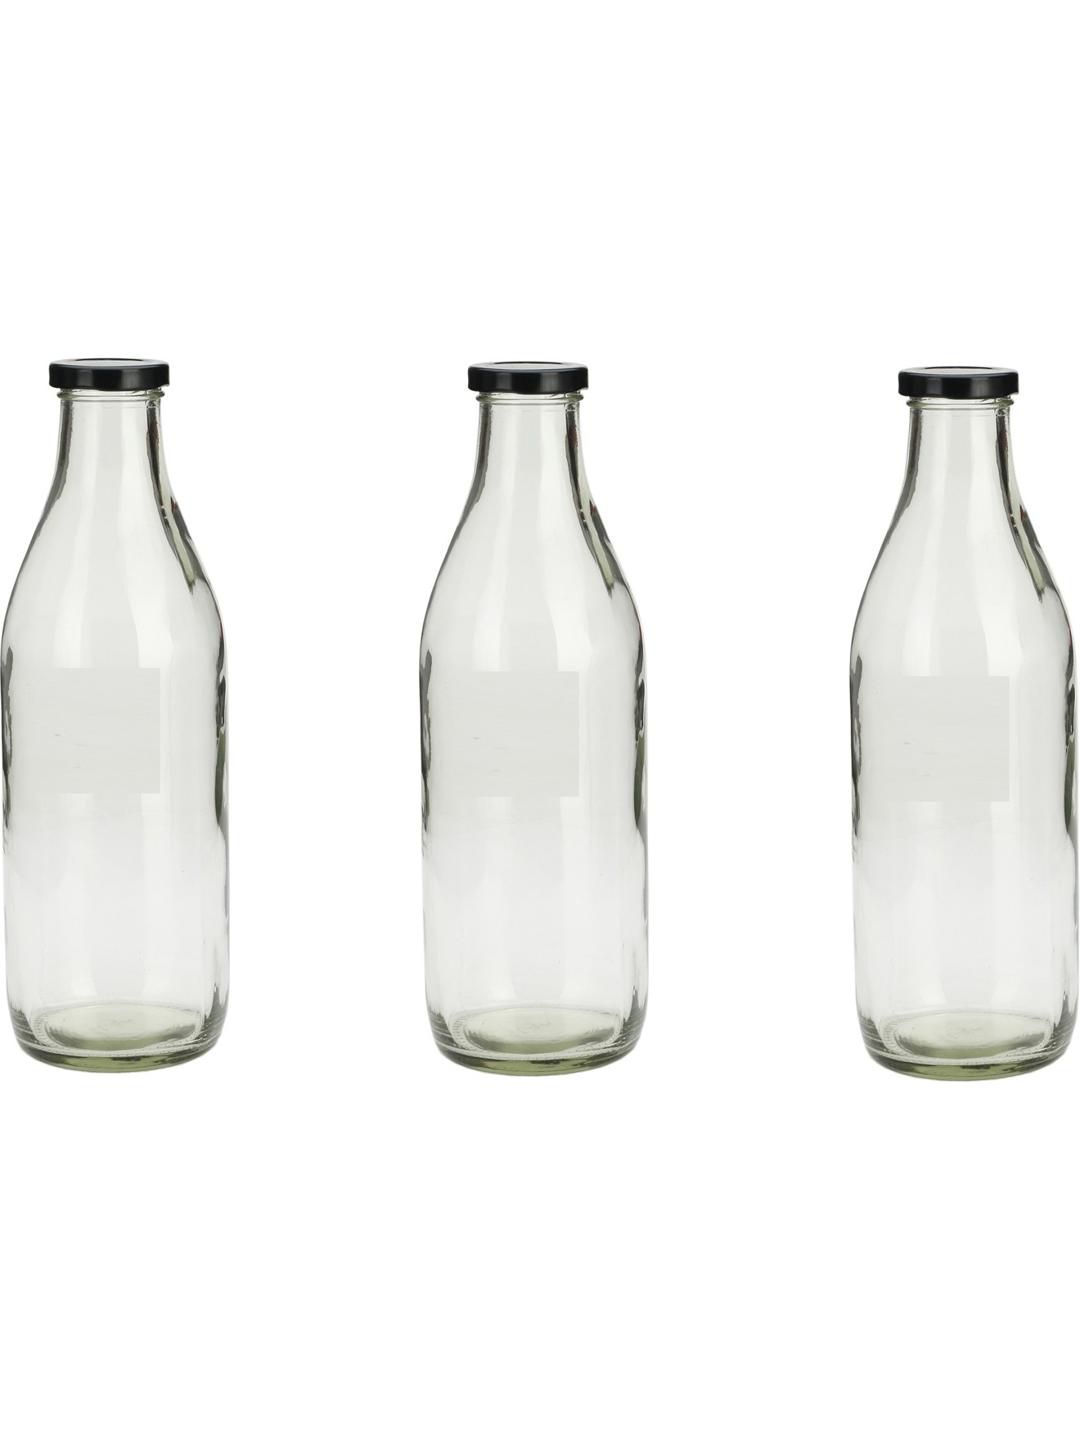     			AFAST Multipurpose Bottle Glass Transparent Utility Container ( Set of 3 )